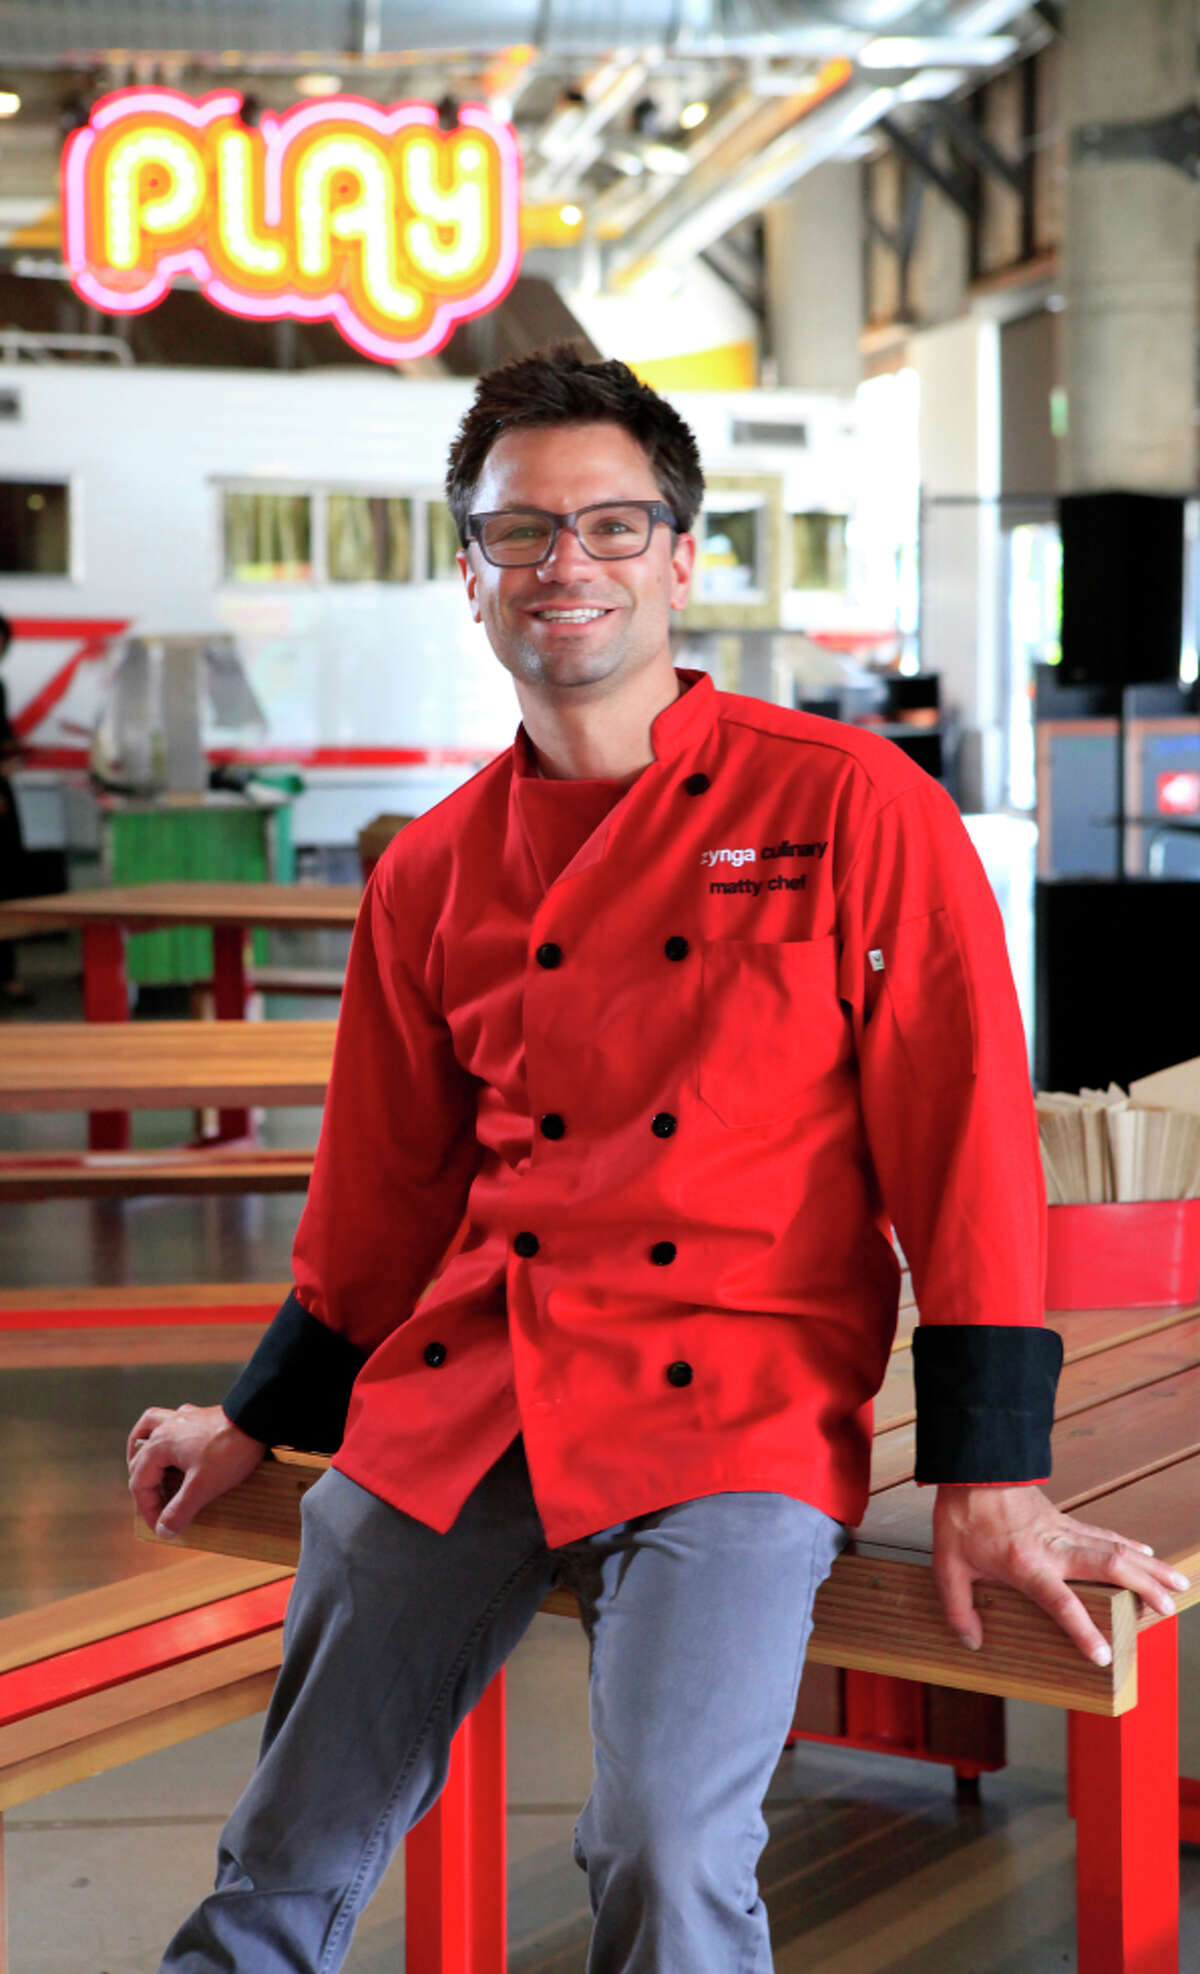 Executive chef Matthew DuTrumble, who says Zynga’s games inspire the staff, believes in team building for all.